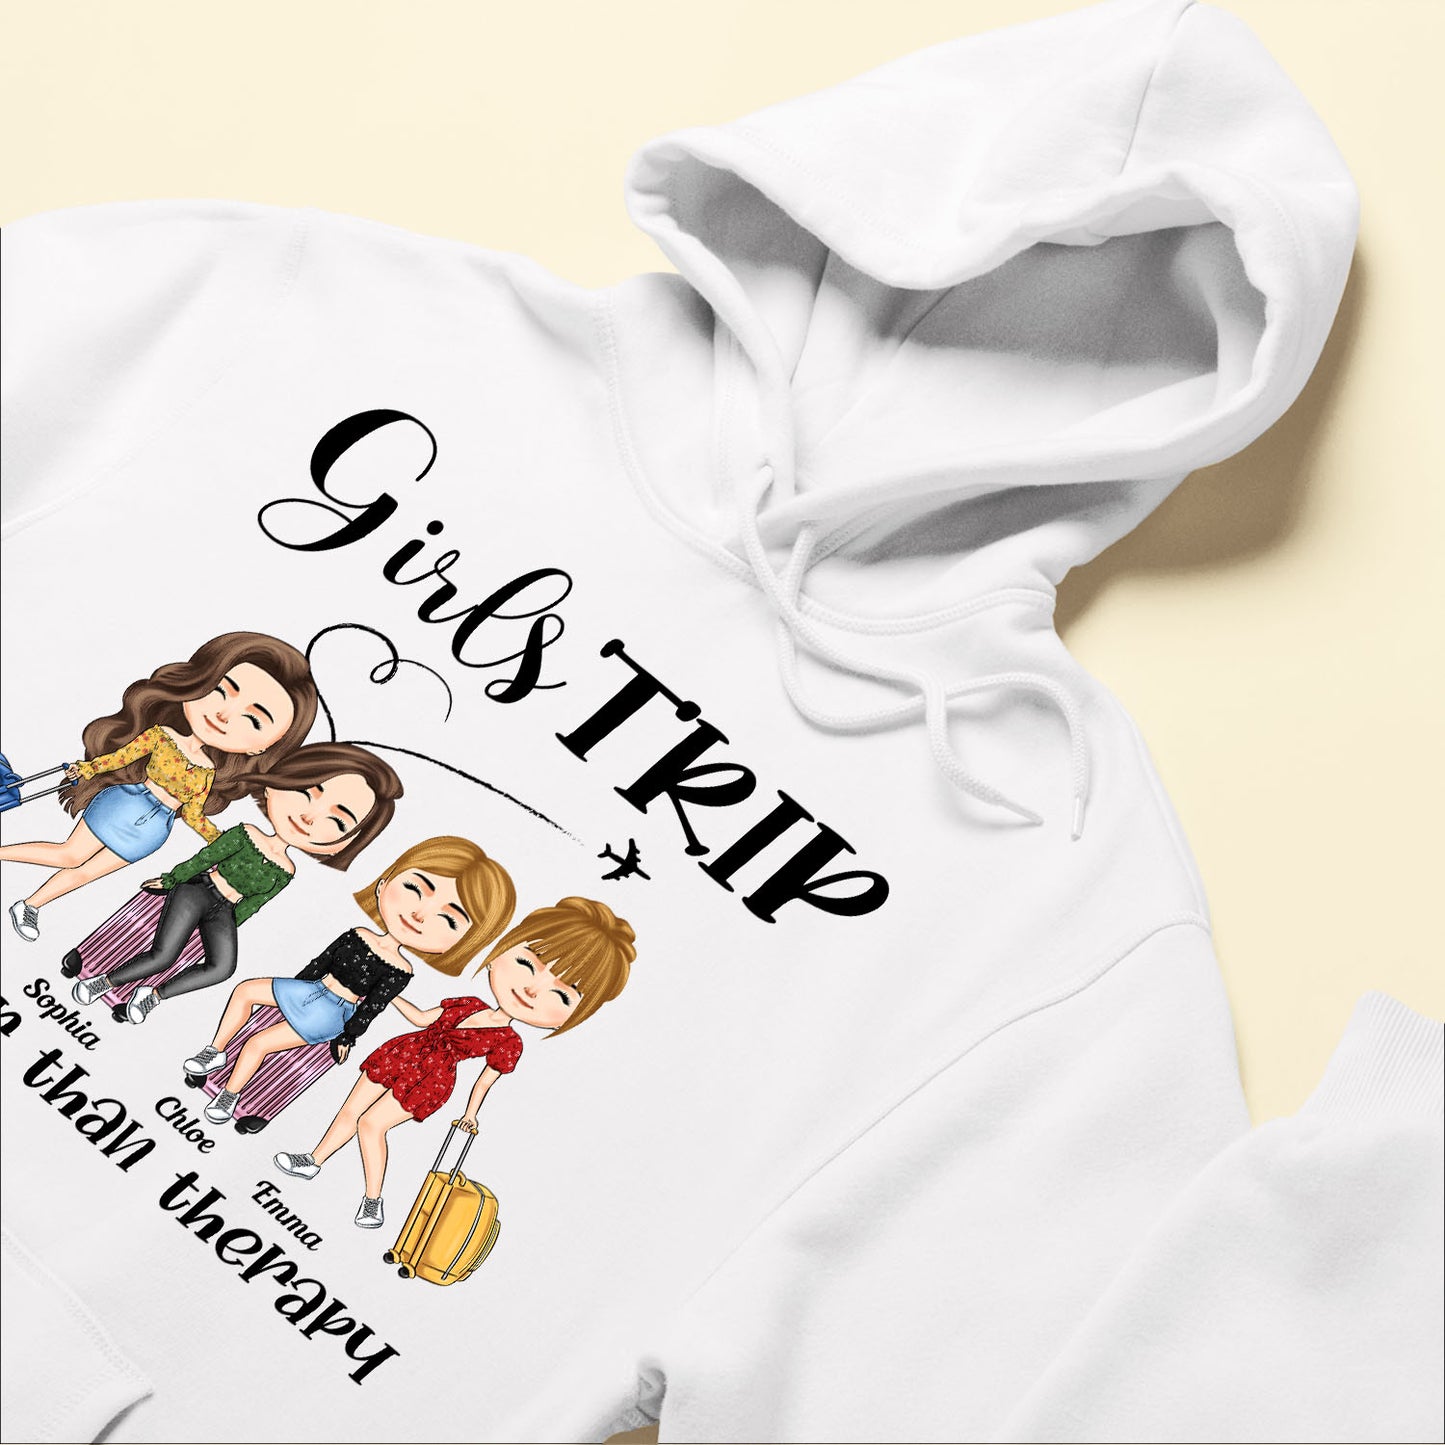 It's Girls Trip Version 2 - Personalized Shirt - Gift For Road Trip Crew, Travel Buddies, Trippin', Campin', Travelin'